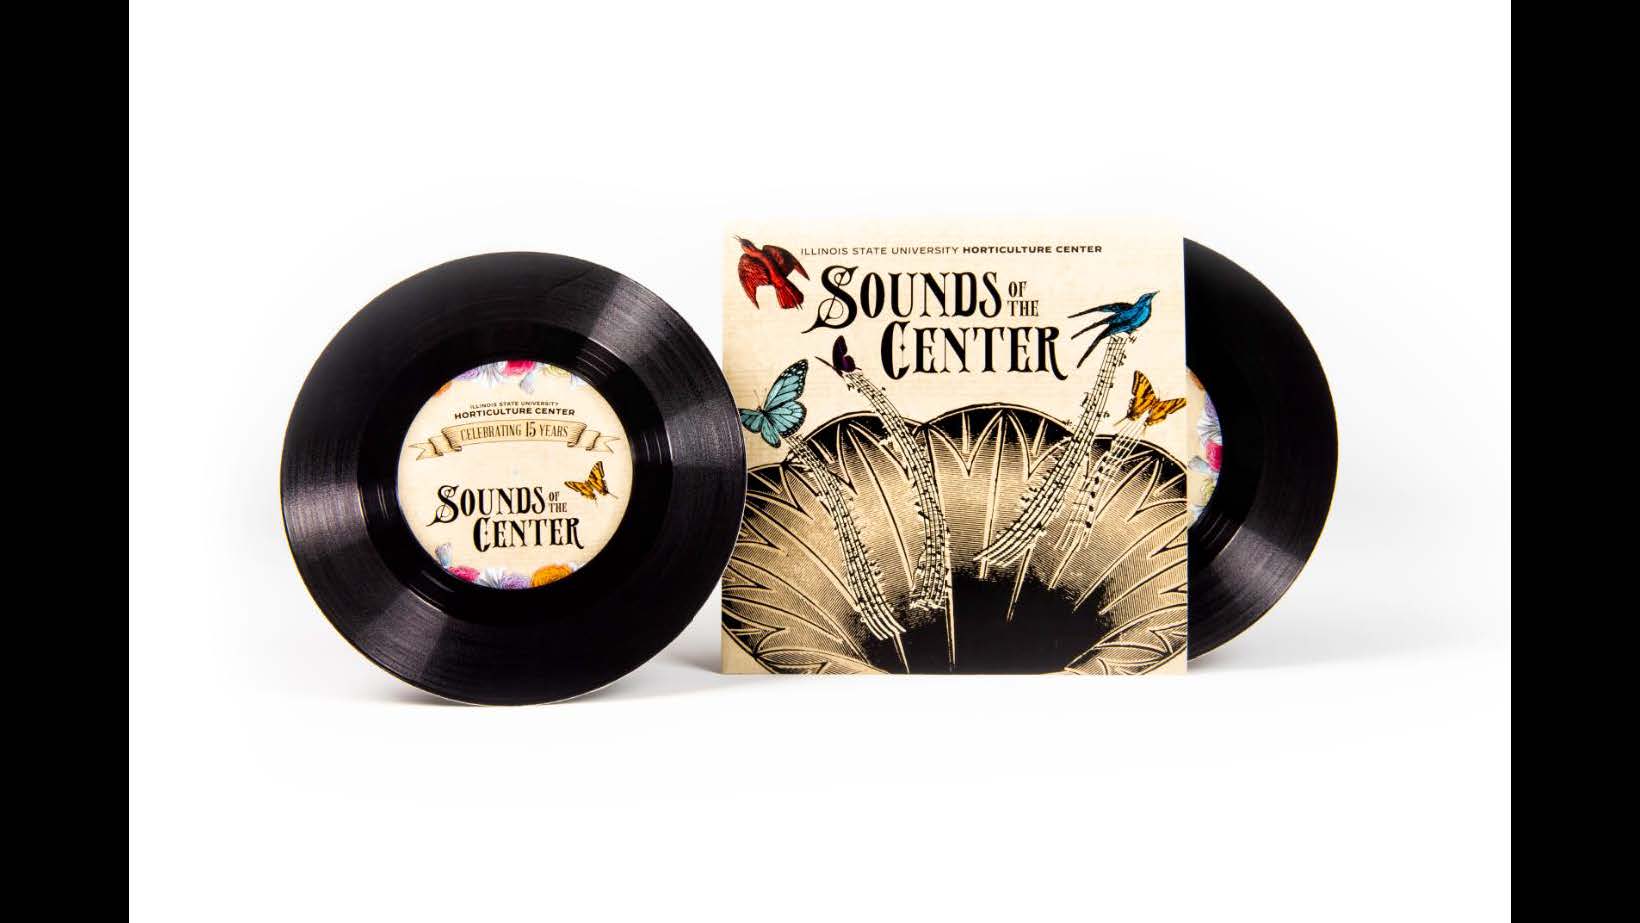 Marketing, Marketing on a Shoestring (Silver): Illinois State University Horticulture Center’s Sounds of the Center events marketing materials designed by Jeff Higgerson and Sean Thornton for the Illinois State University Horticulture Center. album and album cover